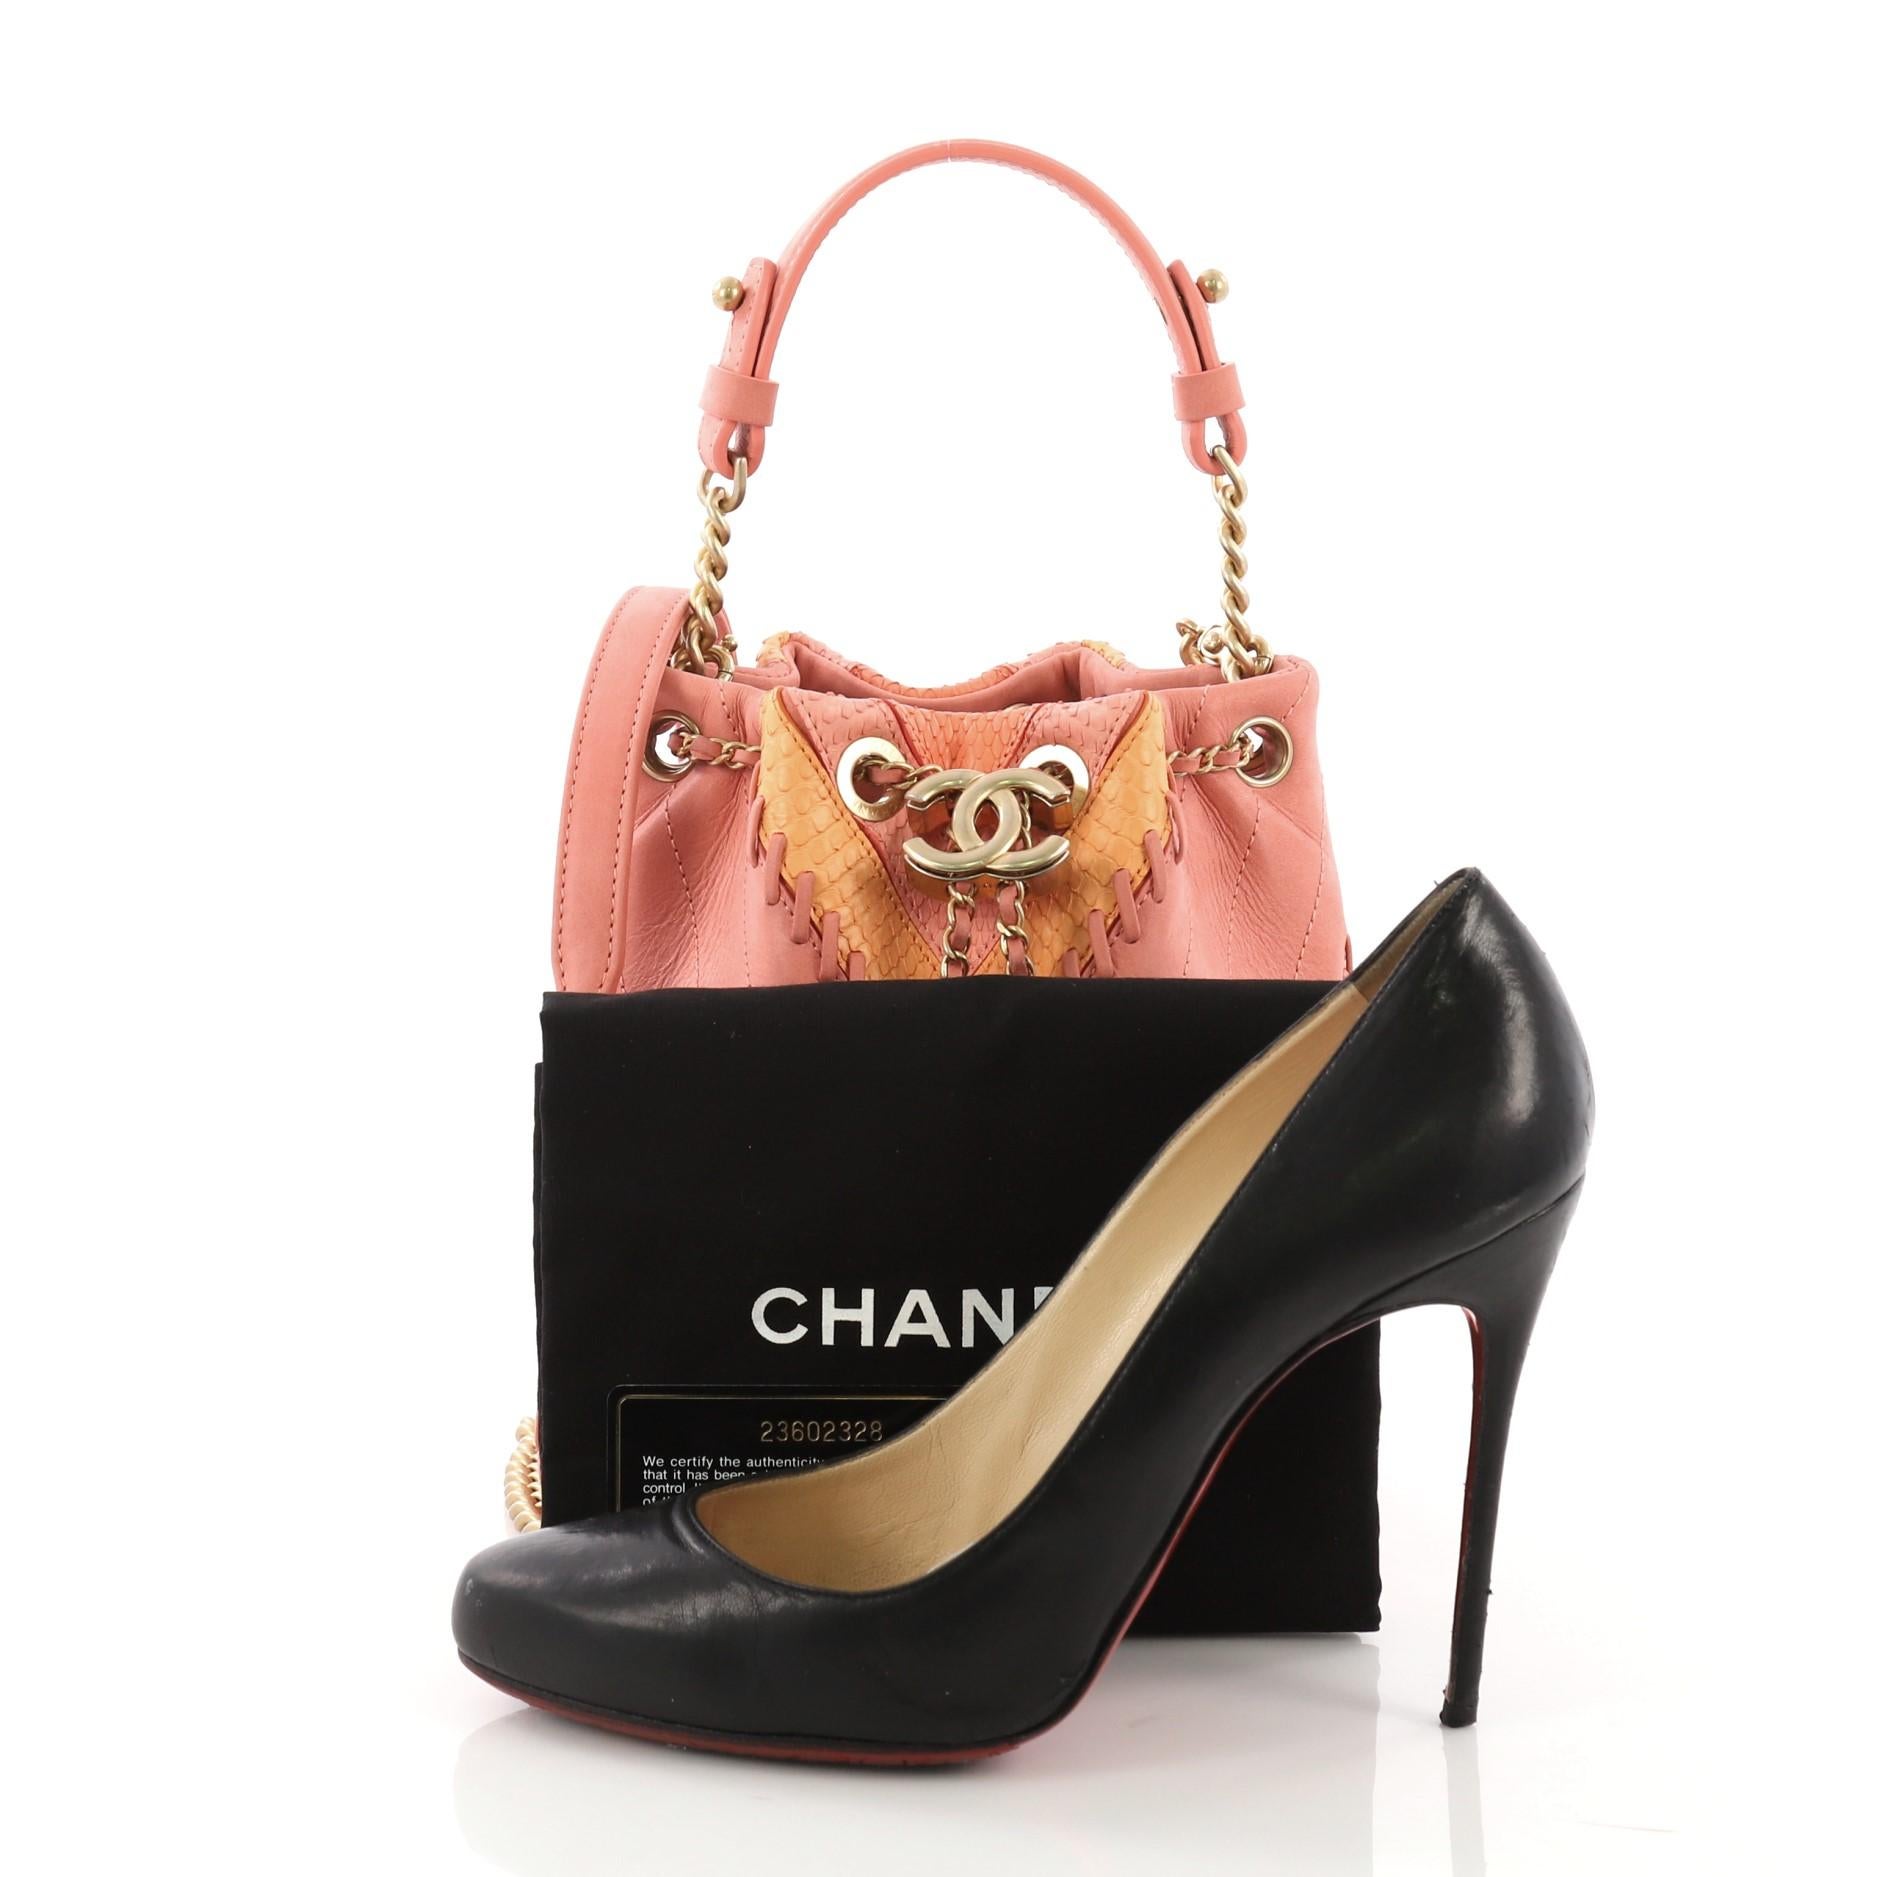 This Chanel CC Drawstring Bucket Bag Whipstitch Chevron Leather and Python Small, crafted from pink whipstitch chevron leather with genuine pink and orange python, features chain link strap with leather pad, interlocking CC logo accent, and matte